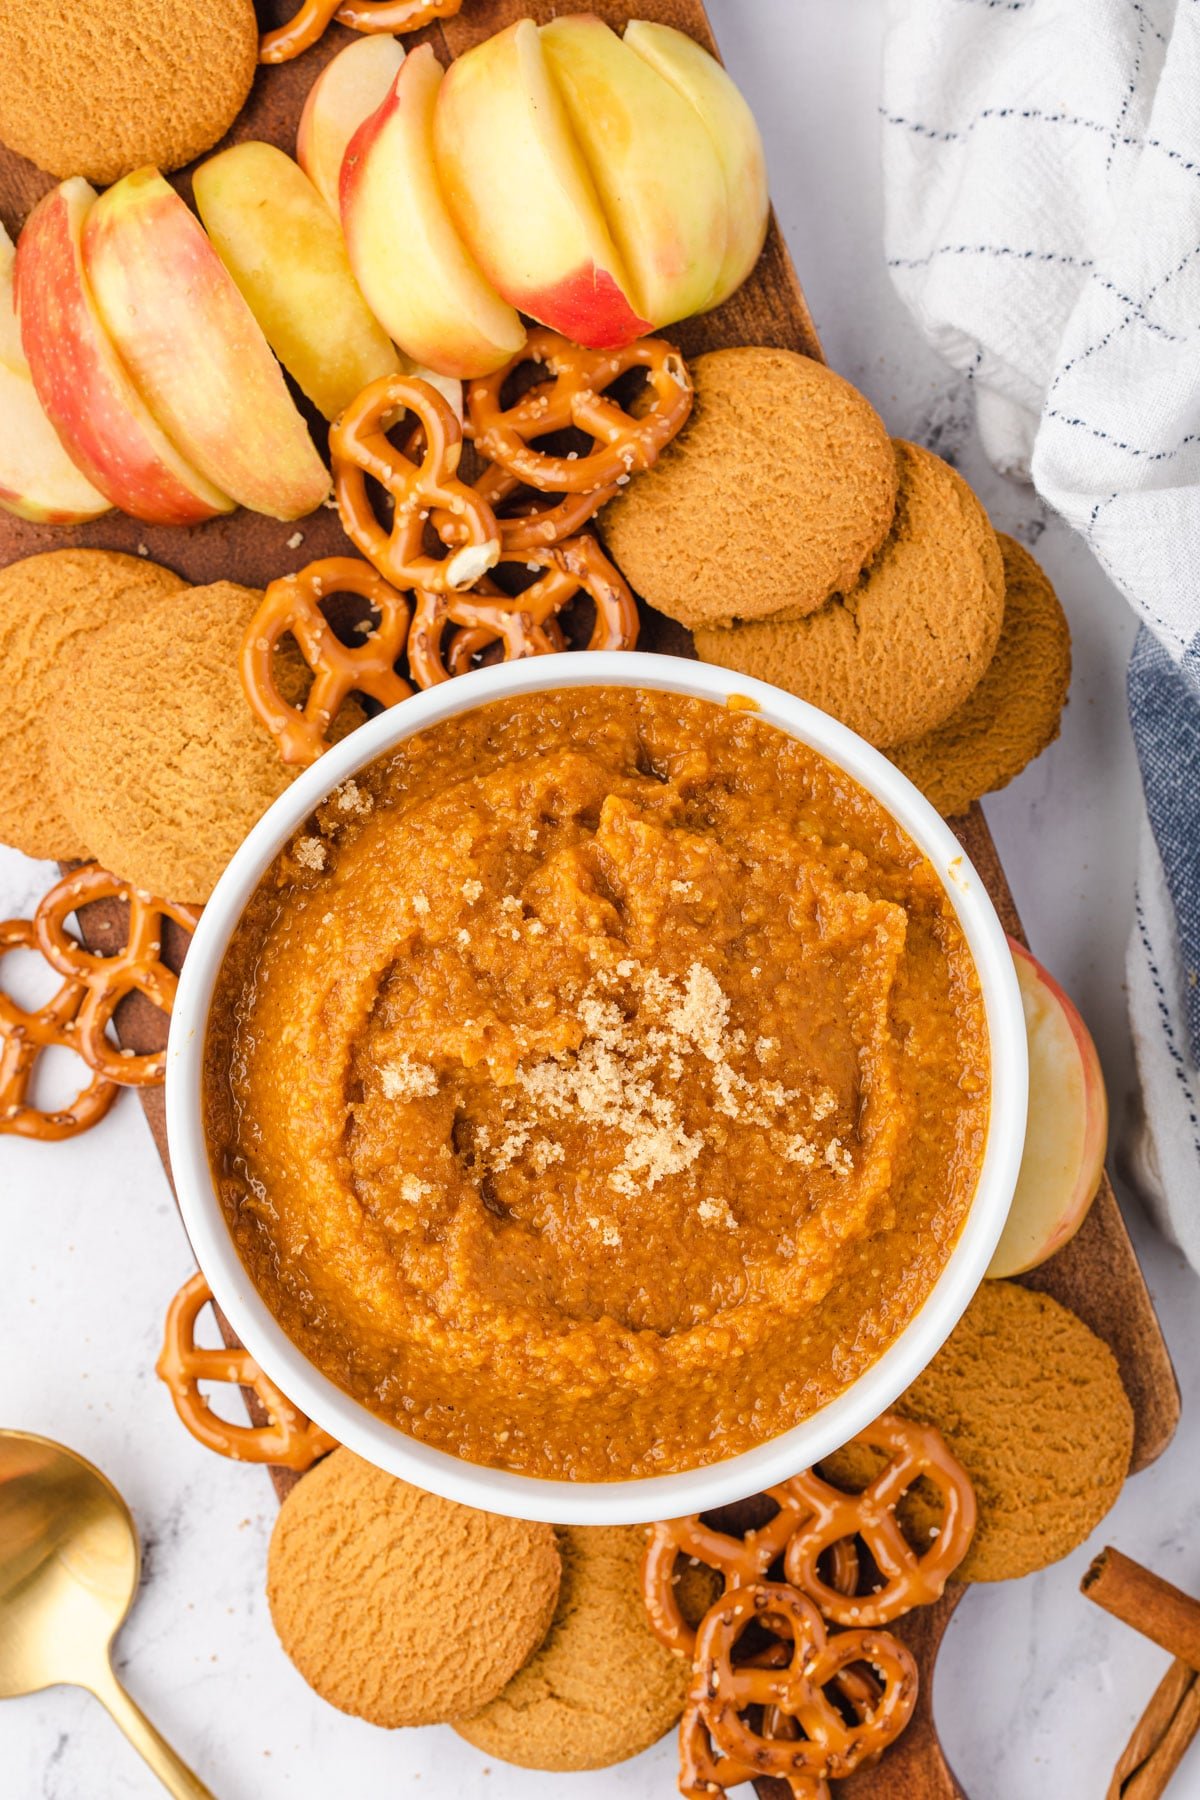 Overhead of bowl of pumpkin hummus sitting on a wooden board with gingersnaps, apples, and pretzels on the board.